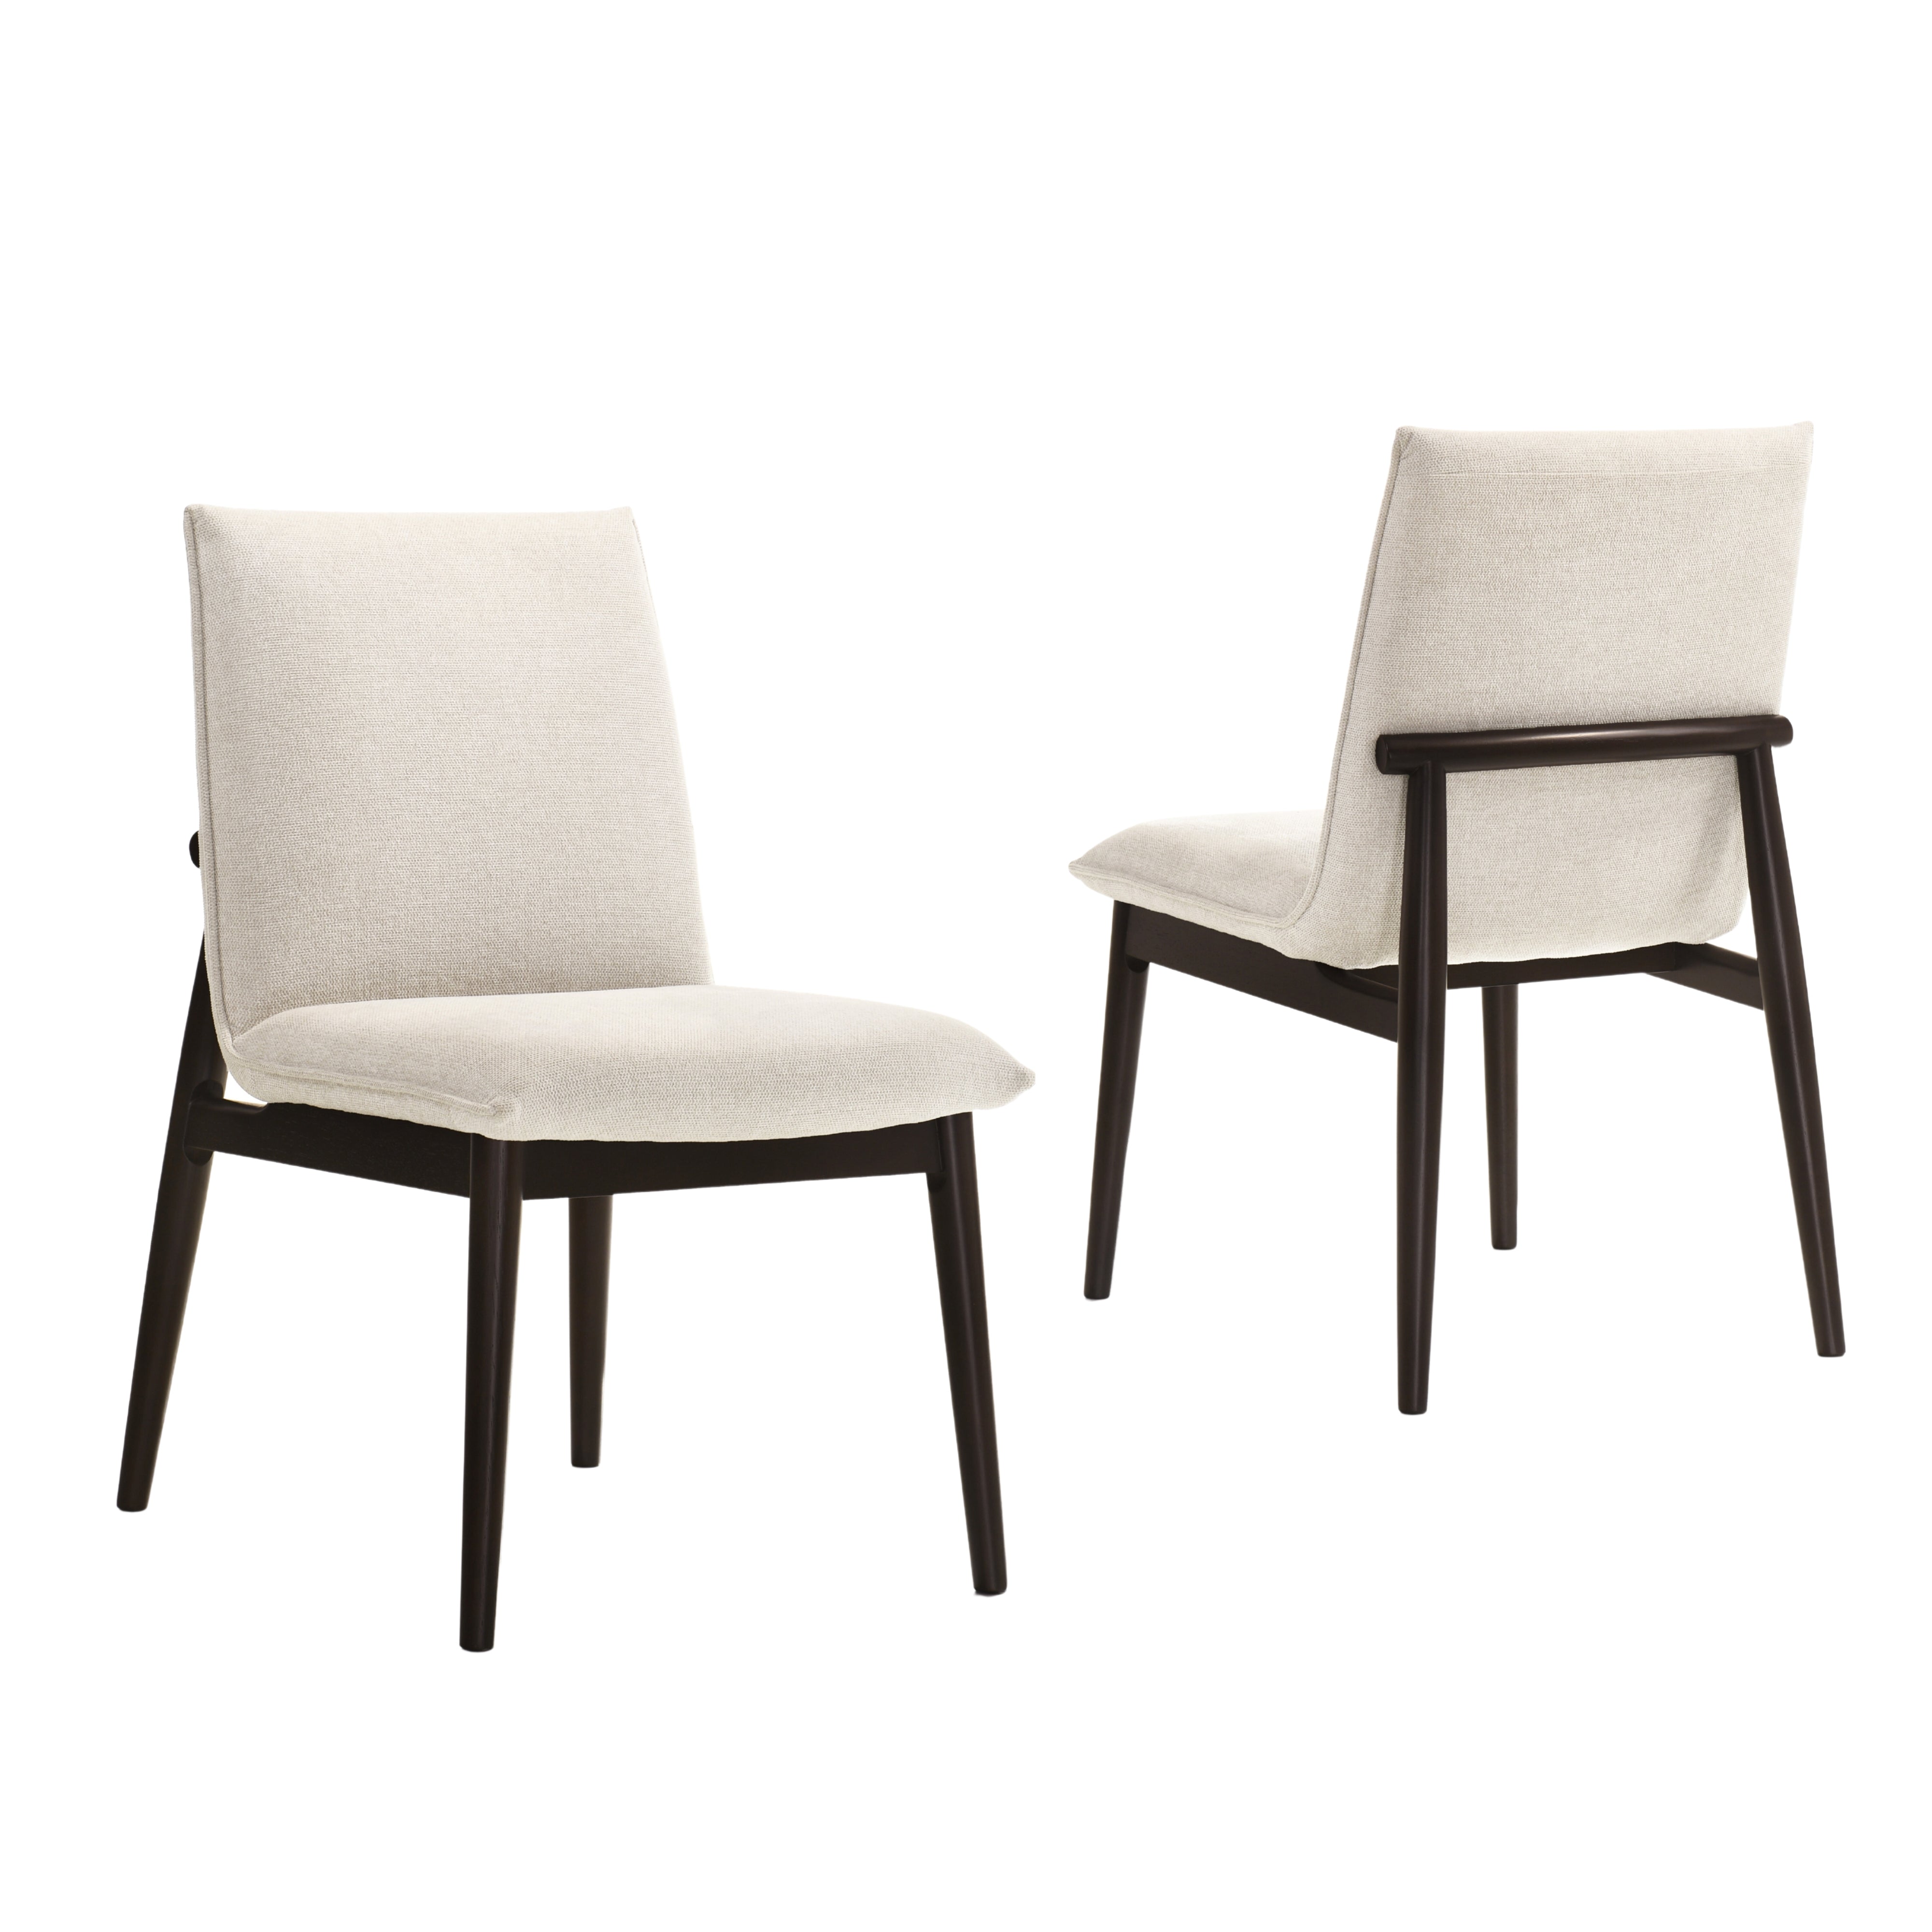 Jean Solid Wood Upholstered Dining Chairs, Oatmeal (Set of 2)